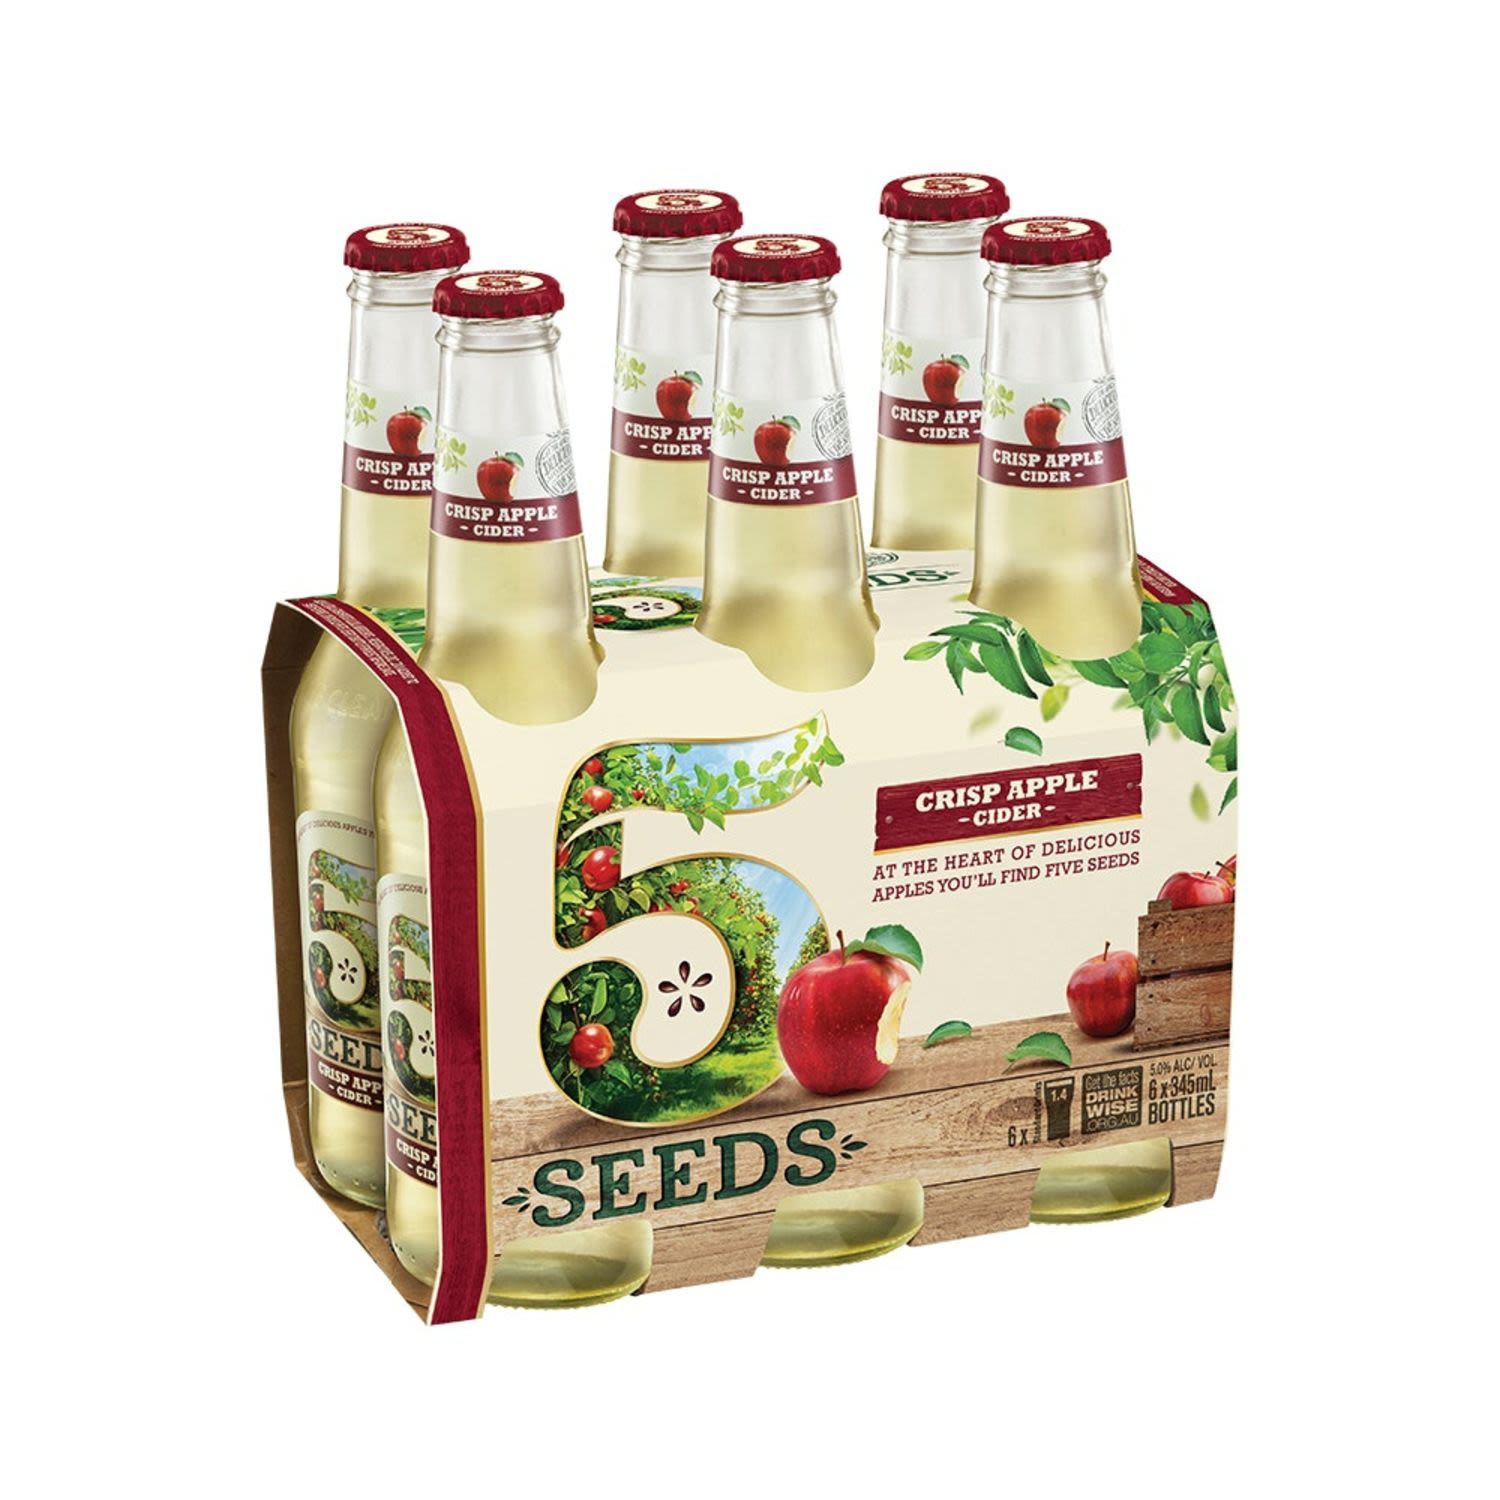 Crafted as a sparkling cider from crushed orchard apples to deliver a champagne-style aroma with rich apple flavour. For those who prefer a less sweet cider, but not too dry.<br /> <br />Alcohol Volume: 5.00%<br /><br />Pack Format: 6 Pack<br /><br />Standard Drinks: 1.4</br /><br />Pack Type: Bottle<br /><br />Country of Origin: Australia<br />